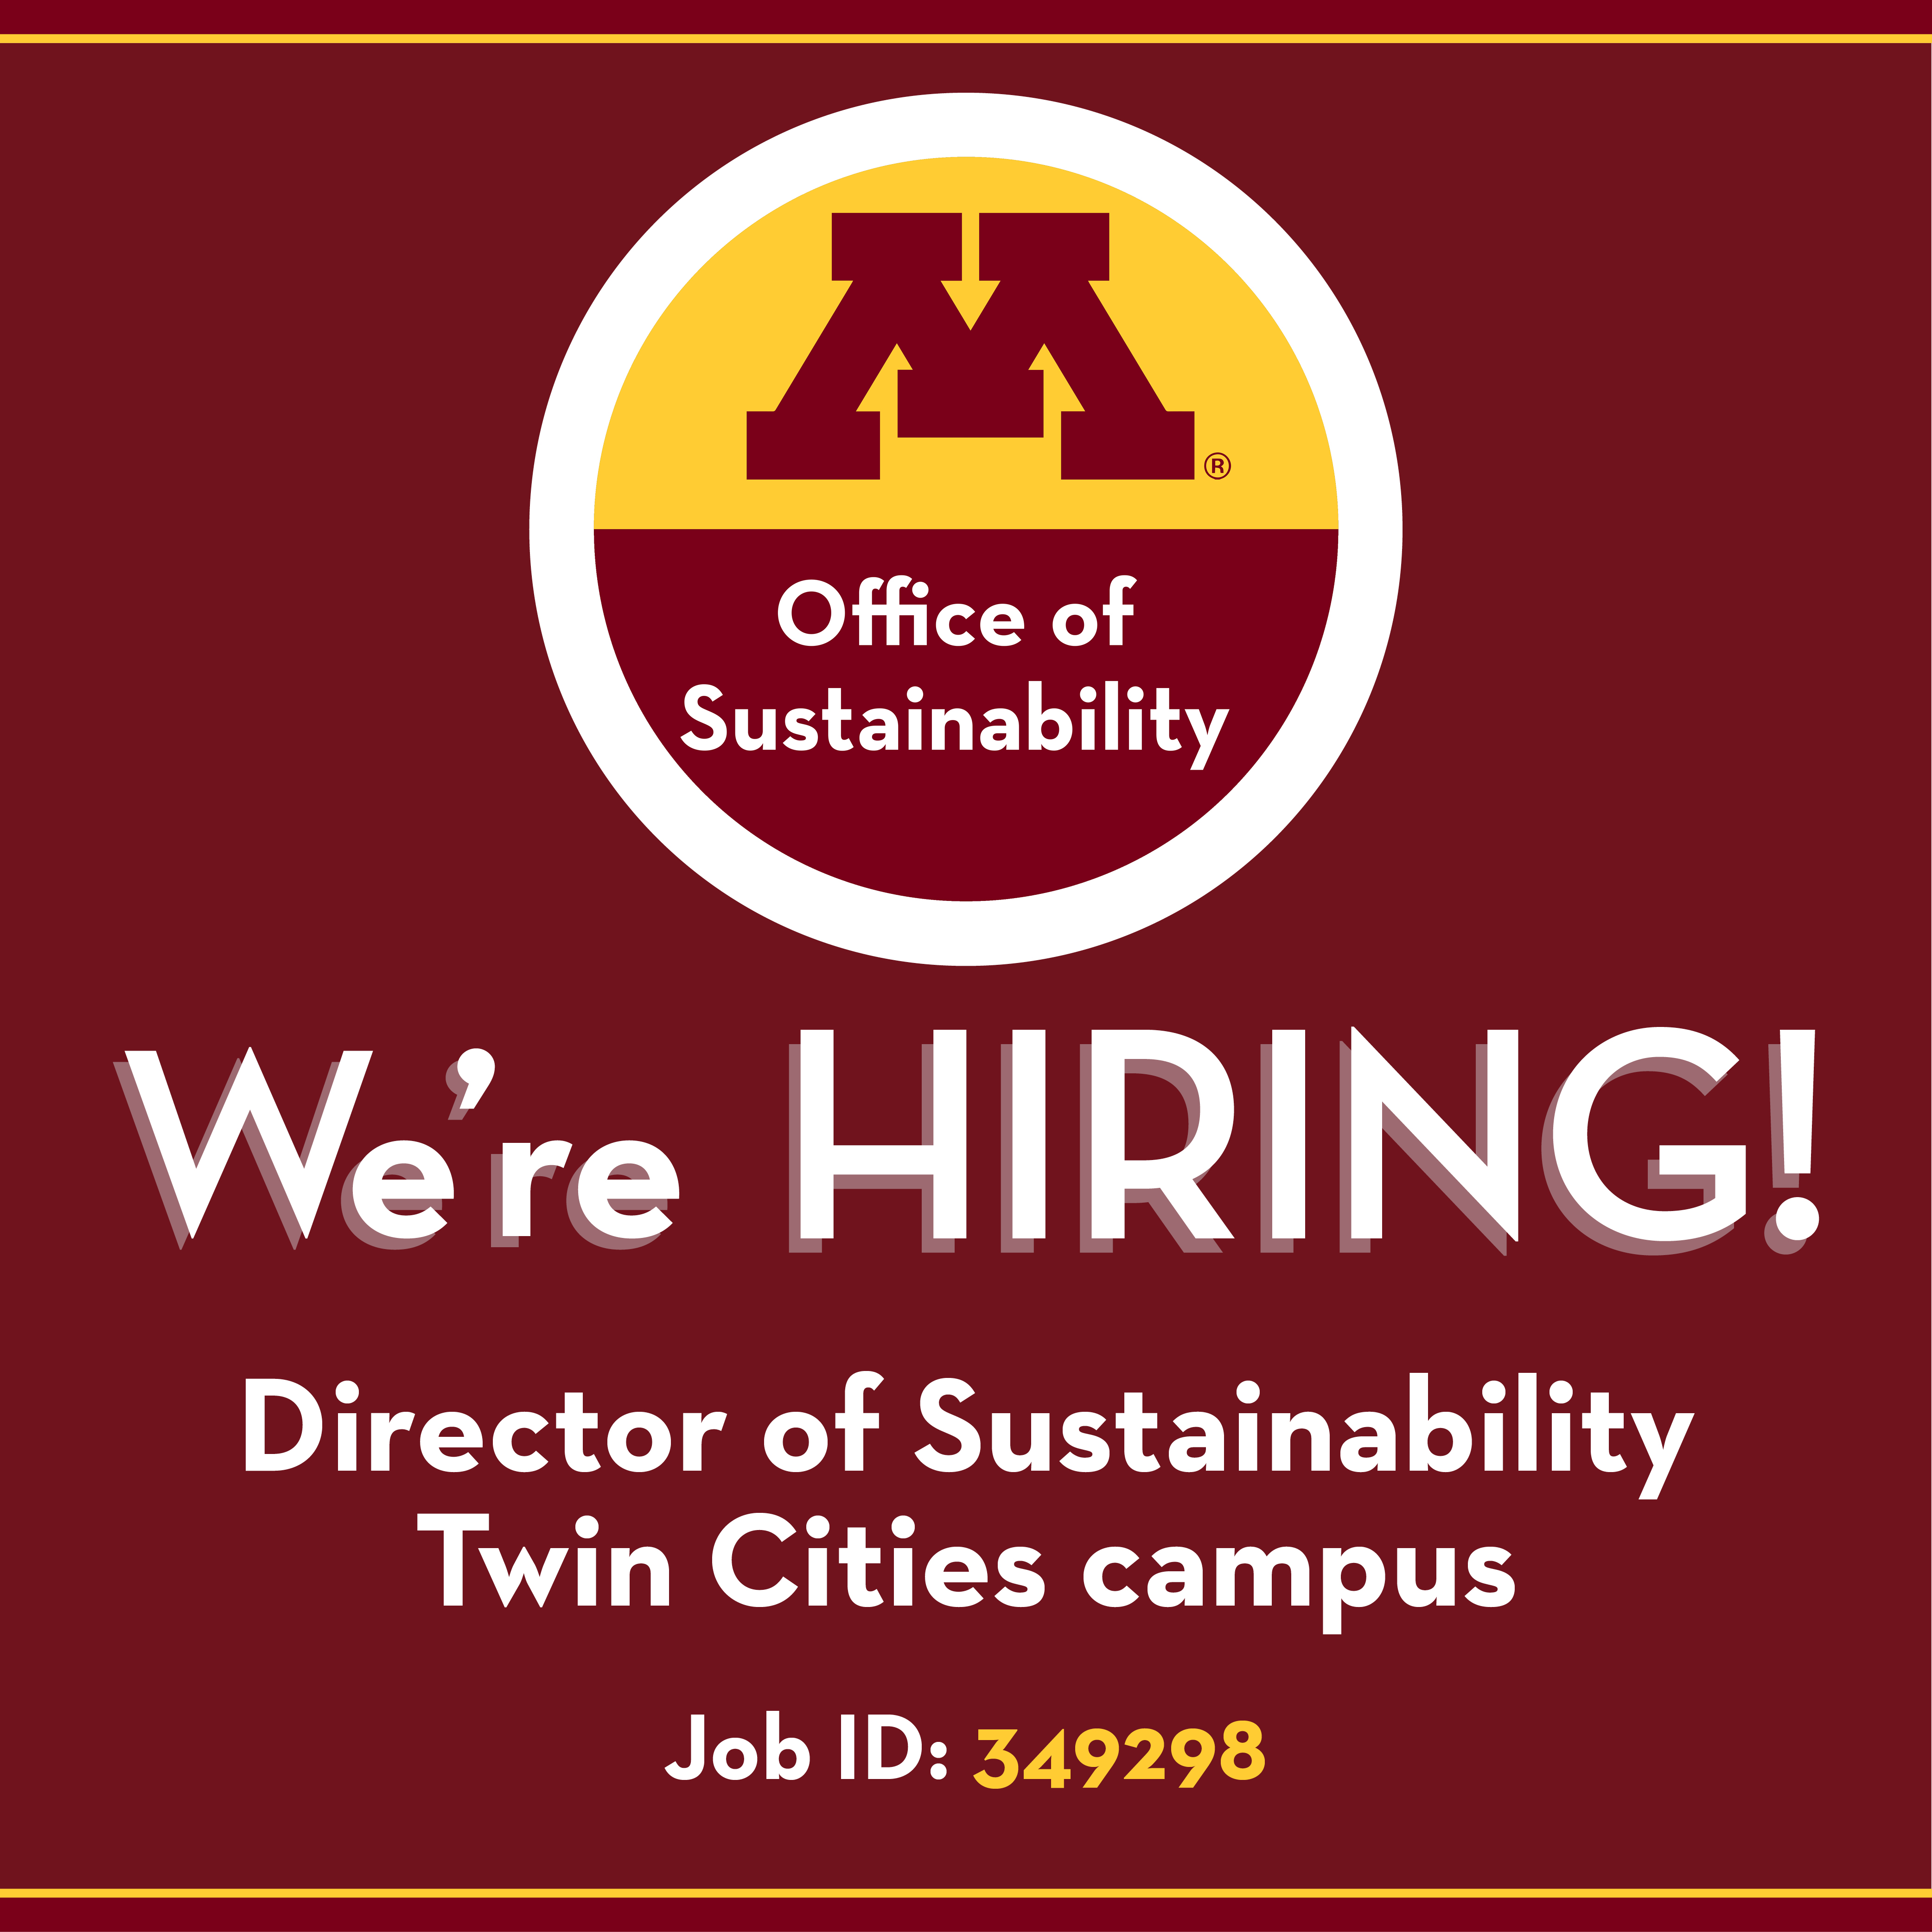 Office of Sustainability. We're hiring Director of Sustainability at the Twin Cities campus. Job ID 349298